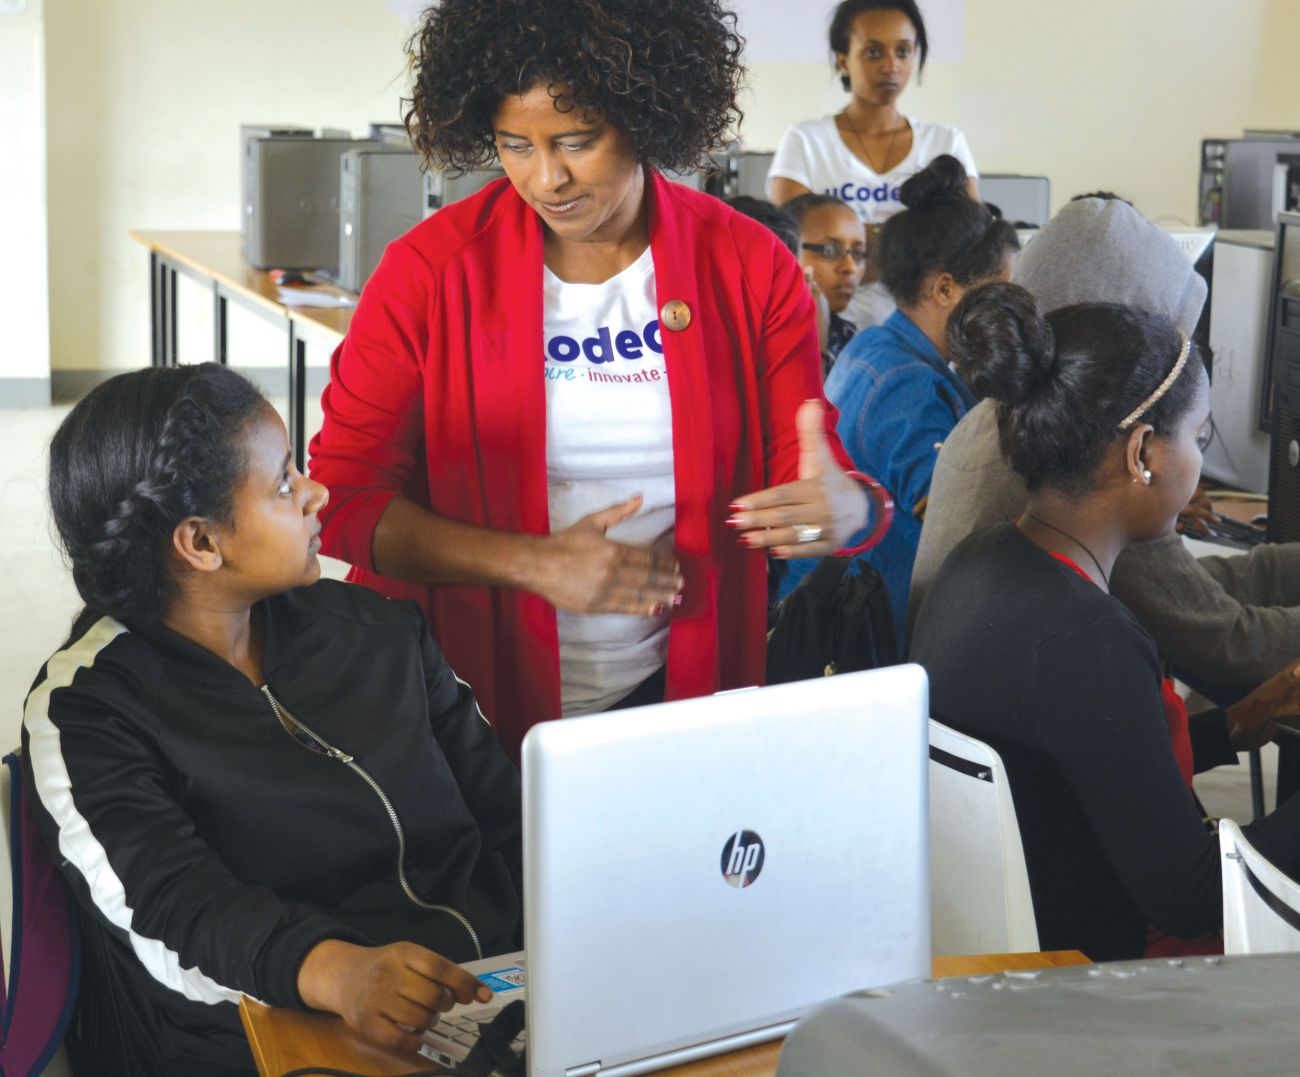 Instructing at uCodeGirl’s Crack the Code: Tech Camp for Girls at Lebawi Academy in Ethiopia